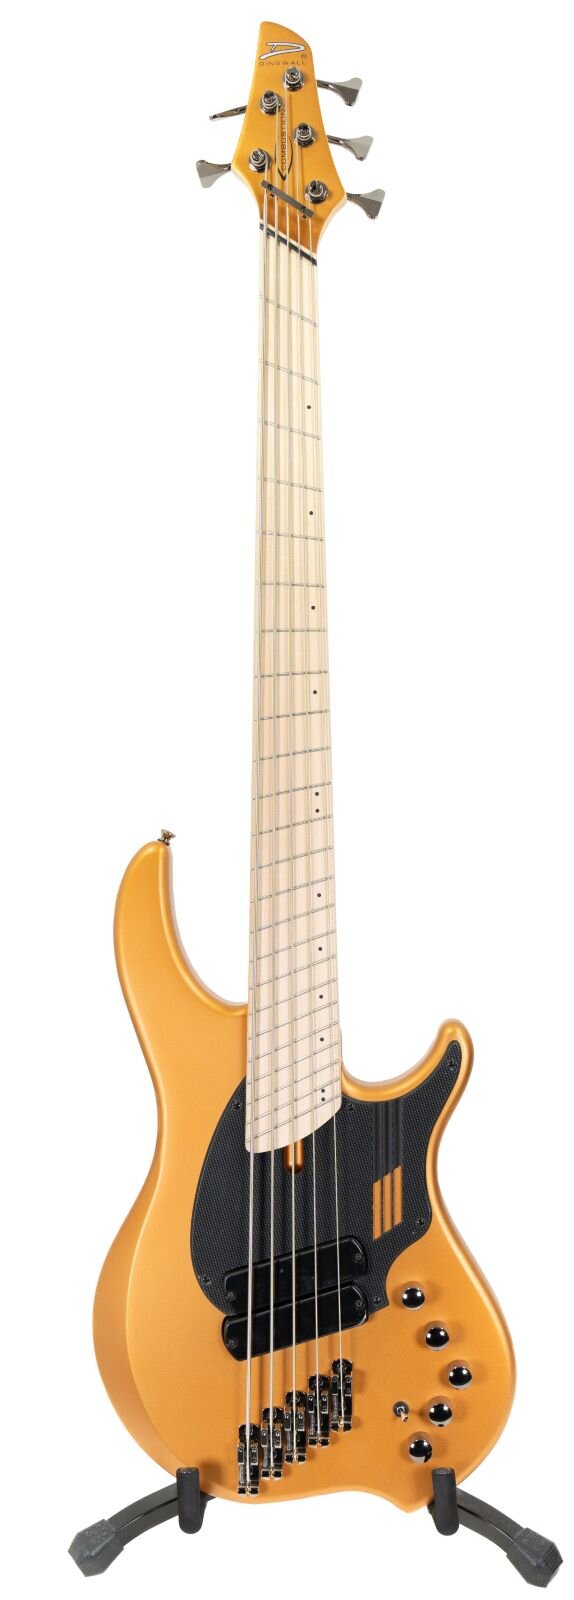 Dingwall NG2 Nolly signature 5-string maple fingerboard Gold Matte : photo 1